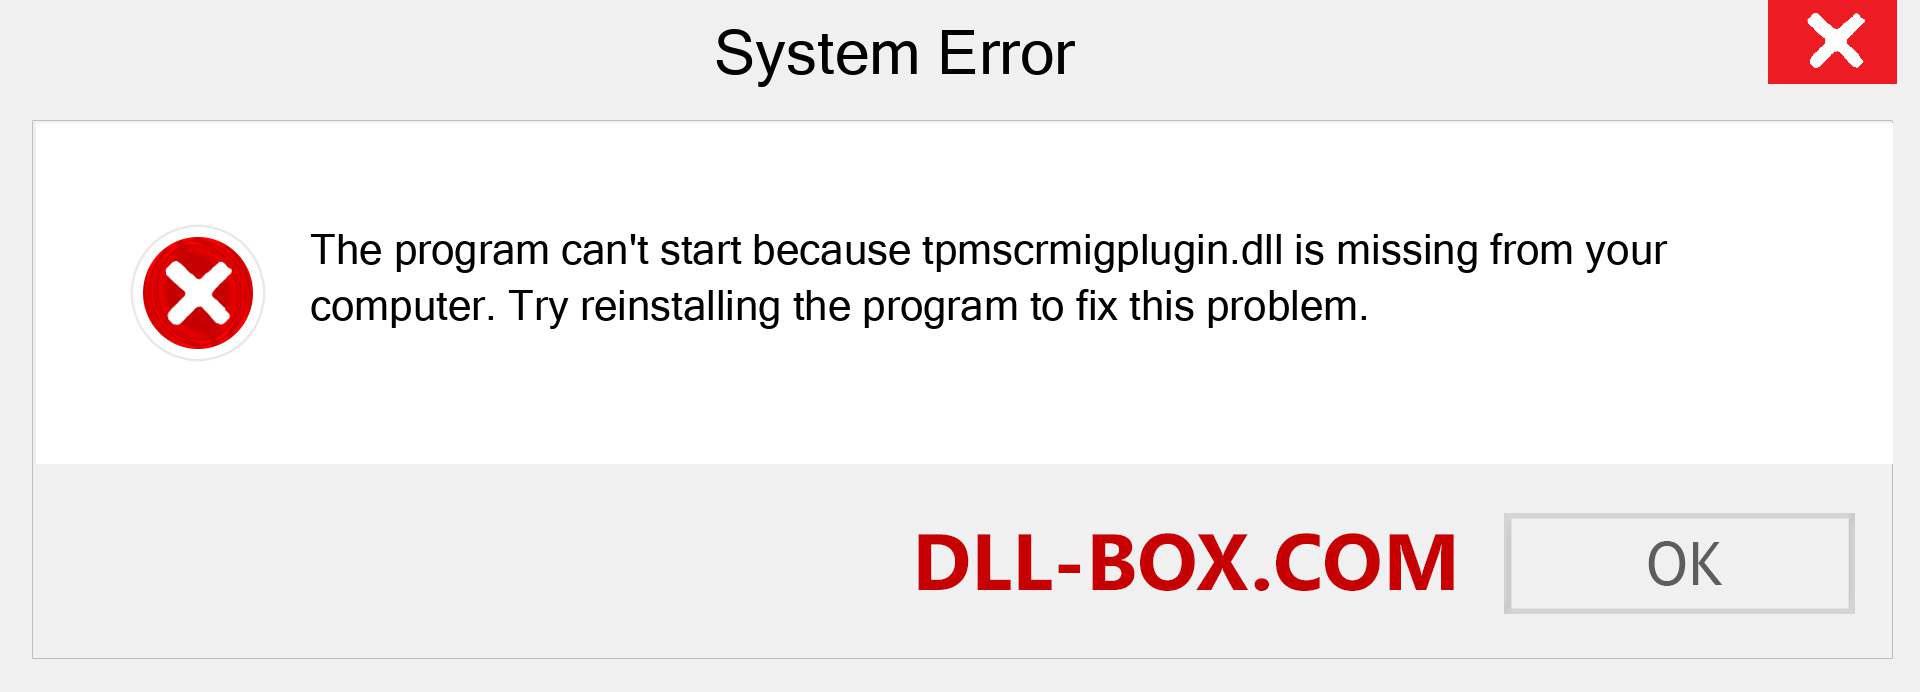  tpmscrmigplugin.dll file is missing?. Download for Windows 7, 8, 10 - Fix  tpmscrmigplugin dll Missing Error on Windows, photos, images